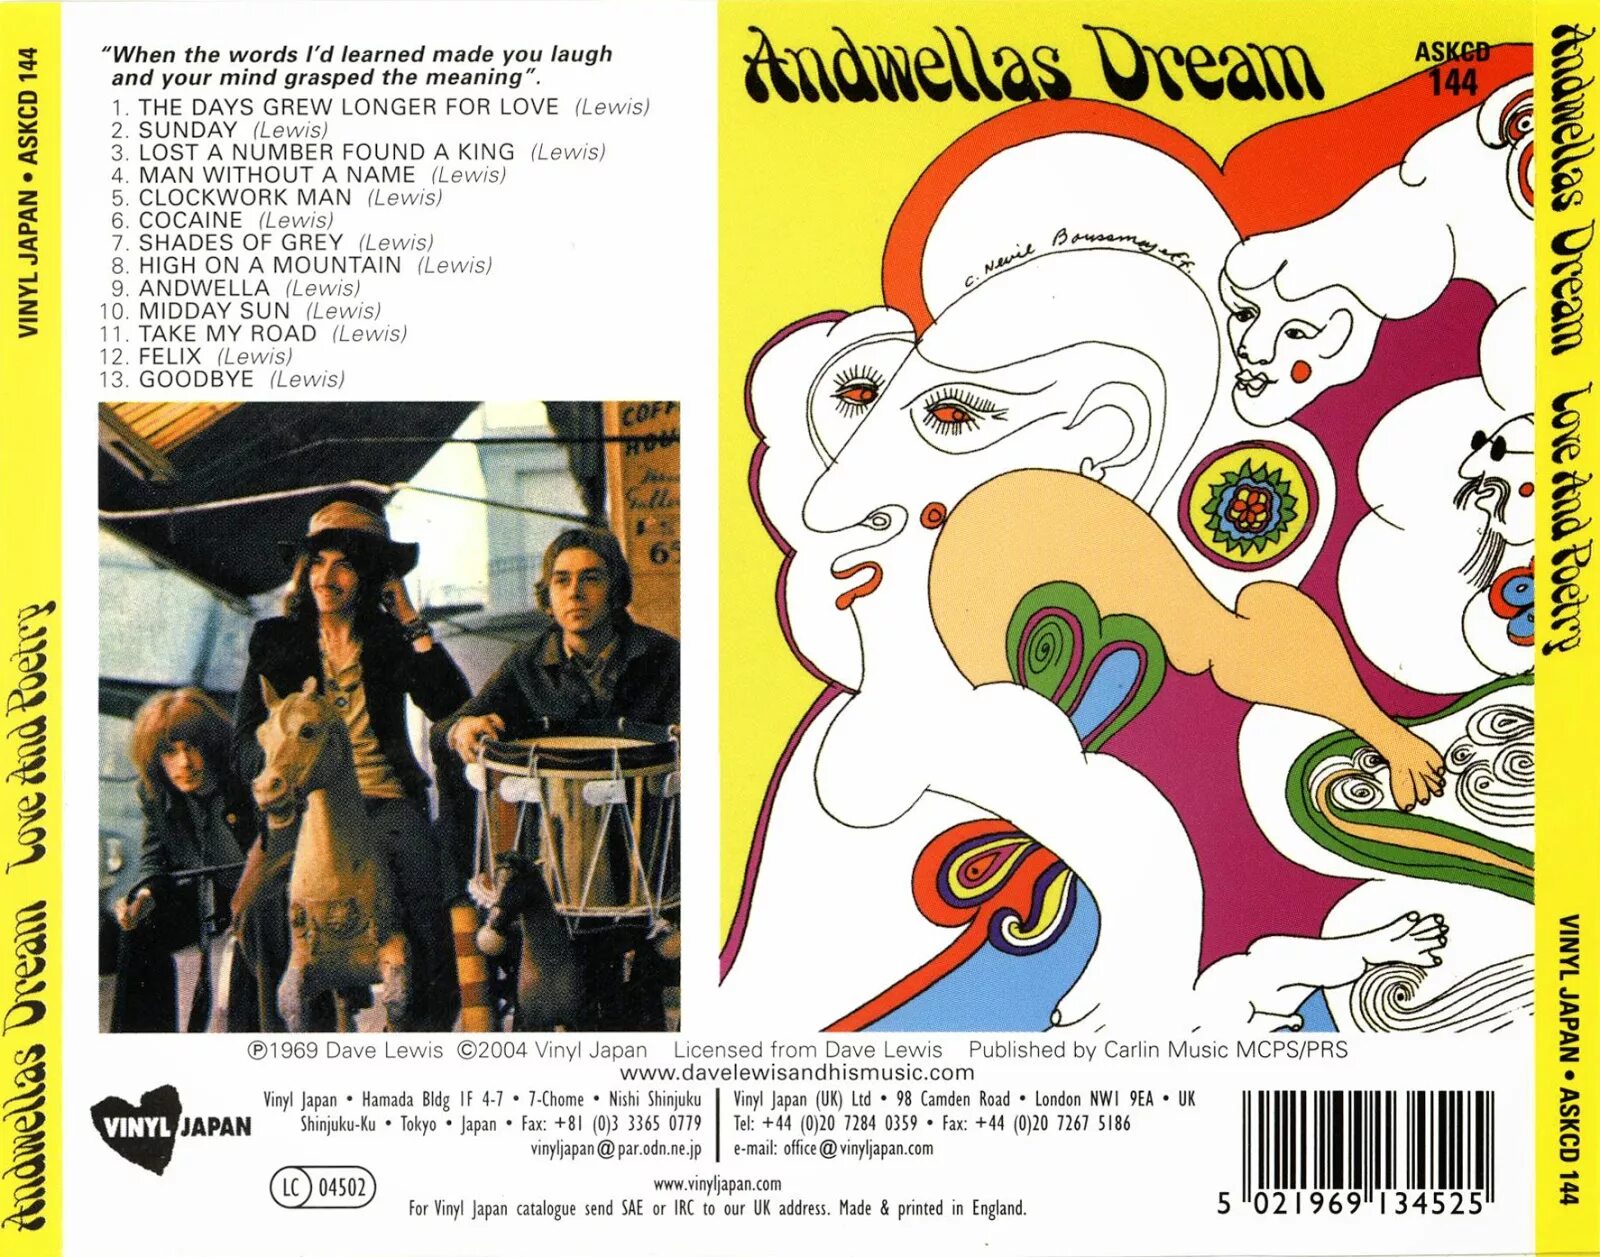 Andwella's Dream Love and Poetry 1969. Andwella группа. Andwella people's people 1971. Andwellas Dream Love and Poetry. Love s dream